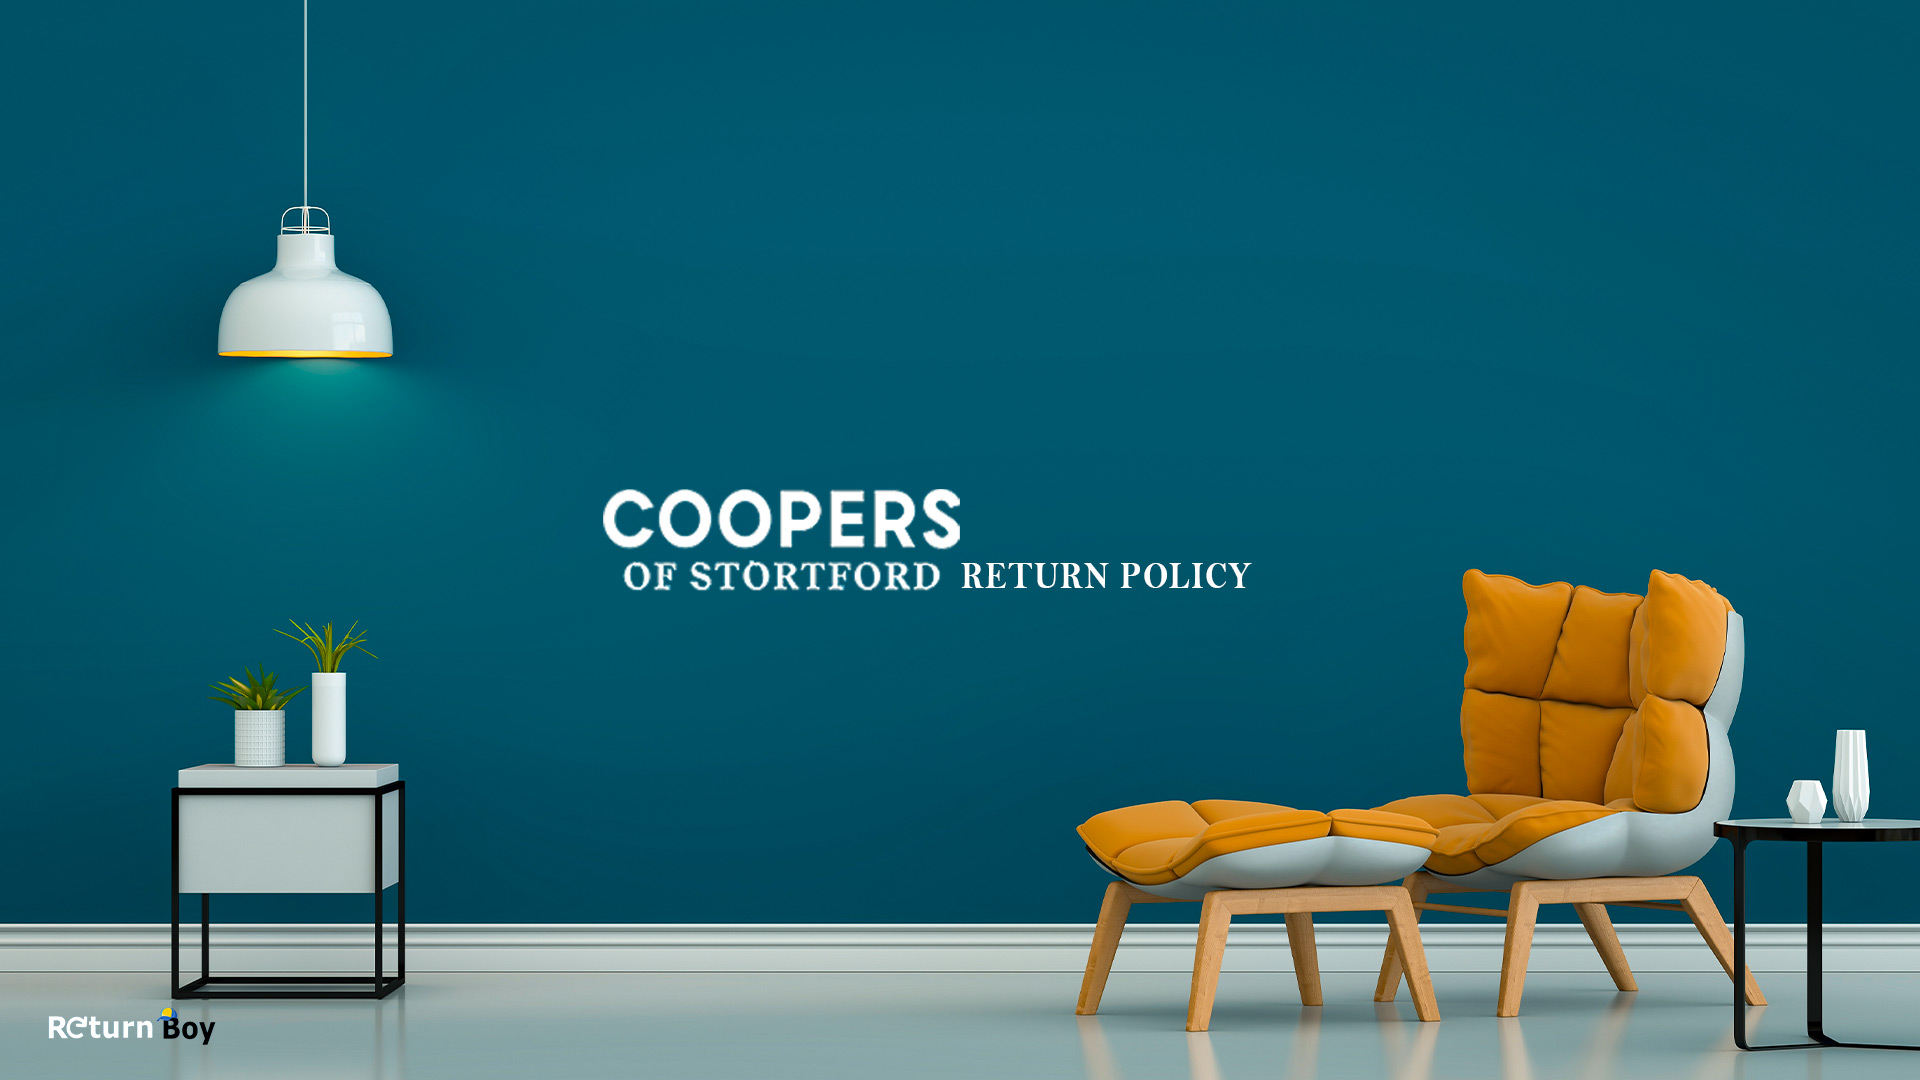 Coopers of Stortford Return Policy